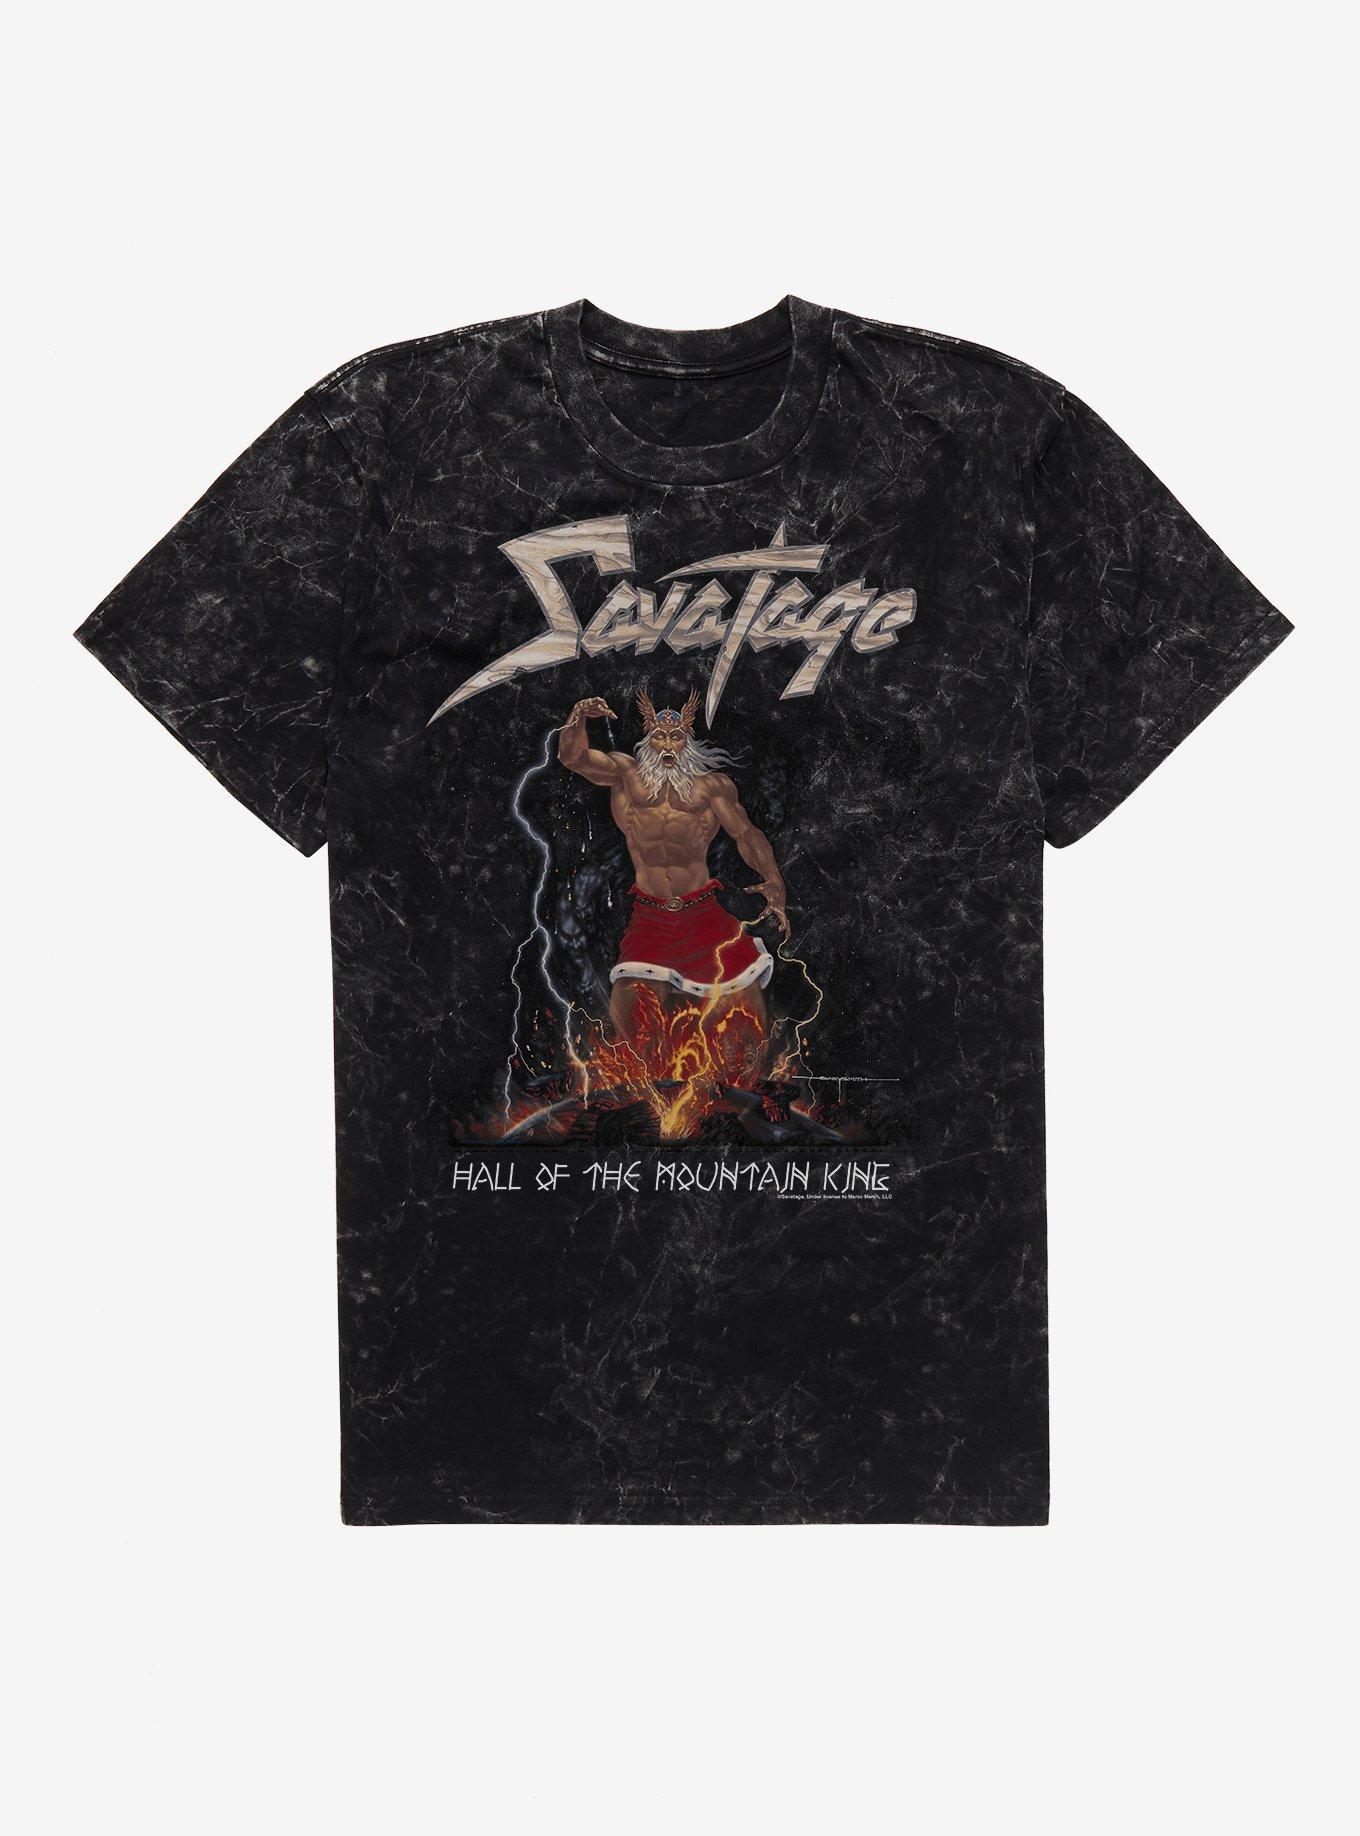 Savatage Hall Of The Mountain King Mineral Wash T-Shirt, BLACK MINERAL WASH, hi-res